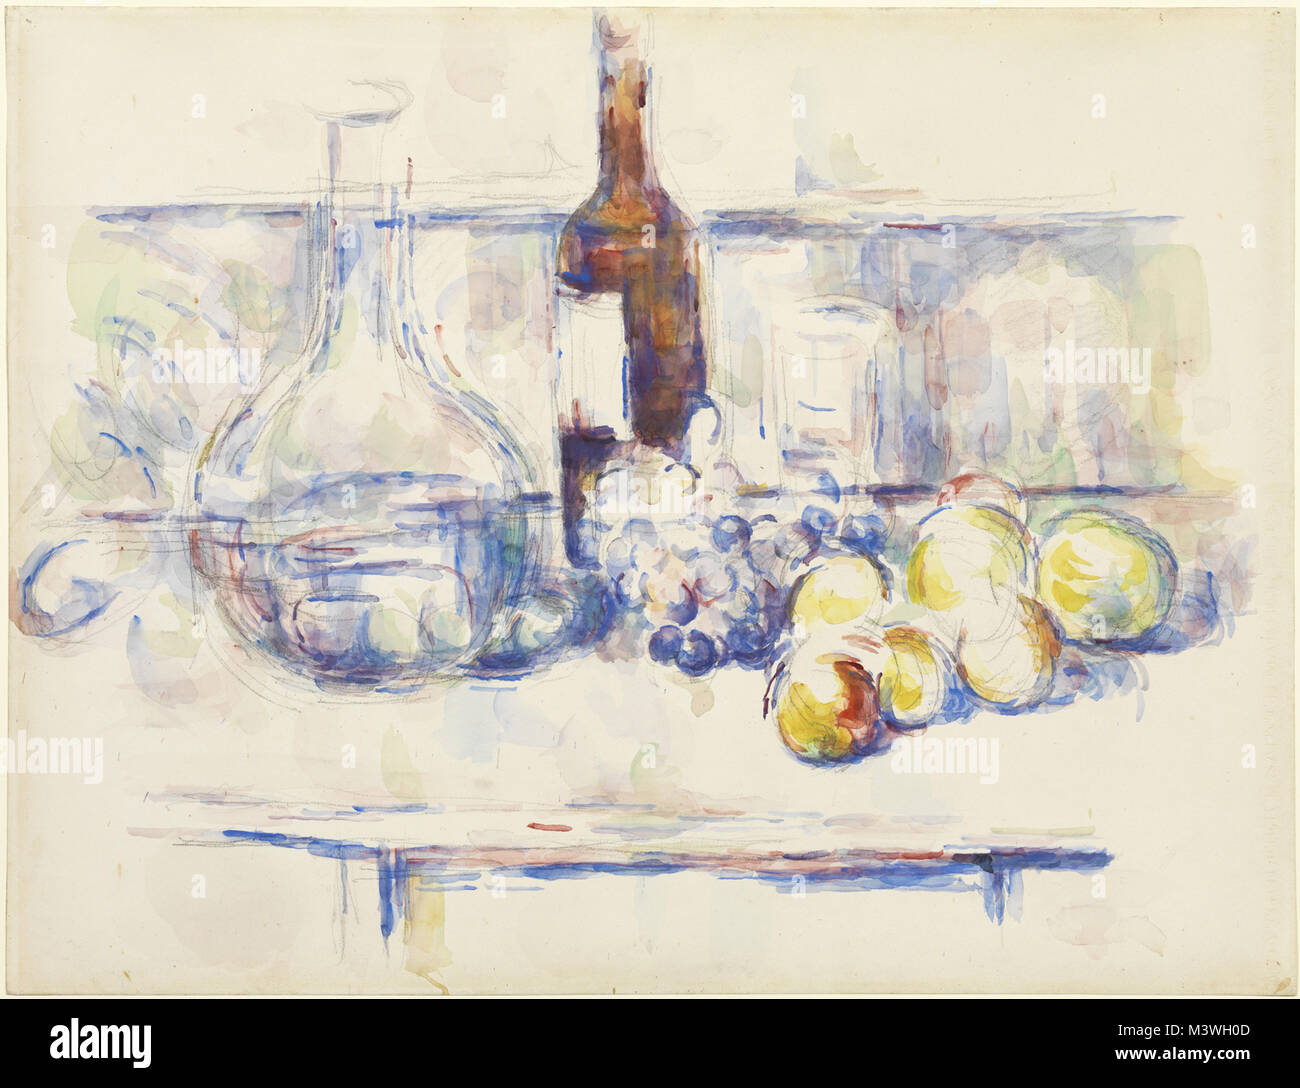 Paul Cézanne, Still Life with Carafe, Bottle, and Fruit, 1906, Stock Photo